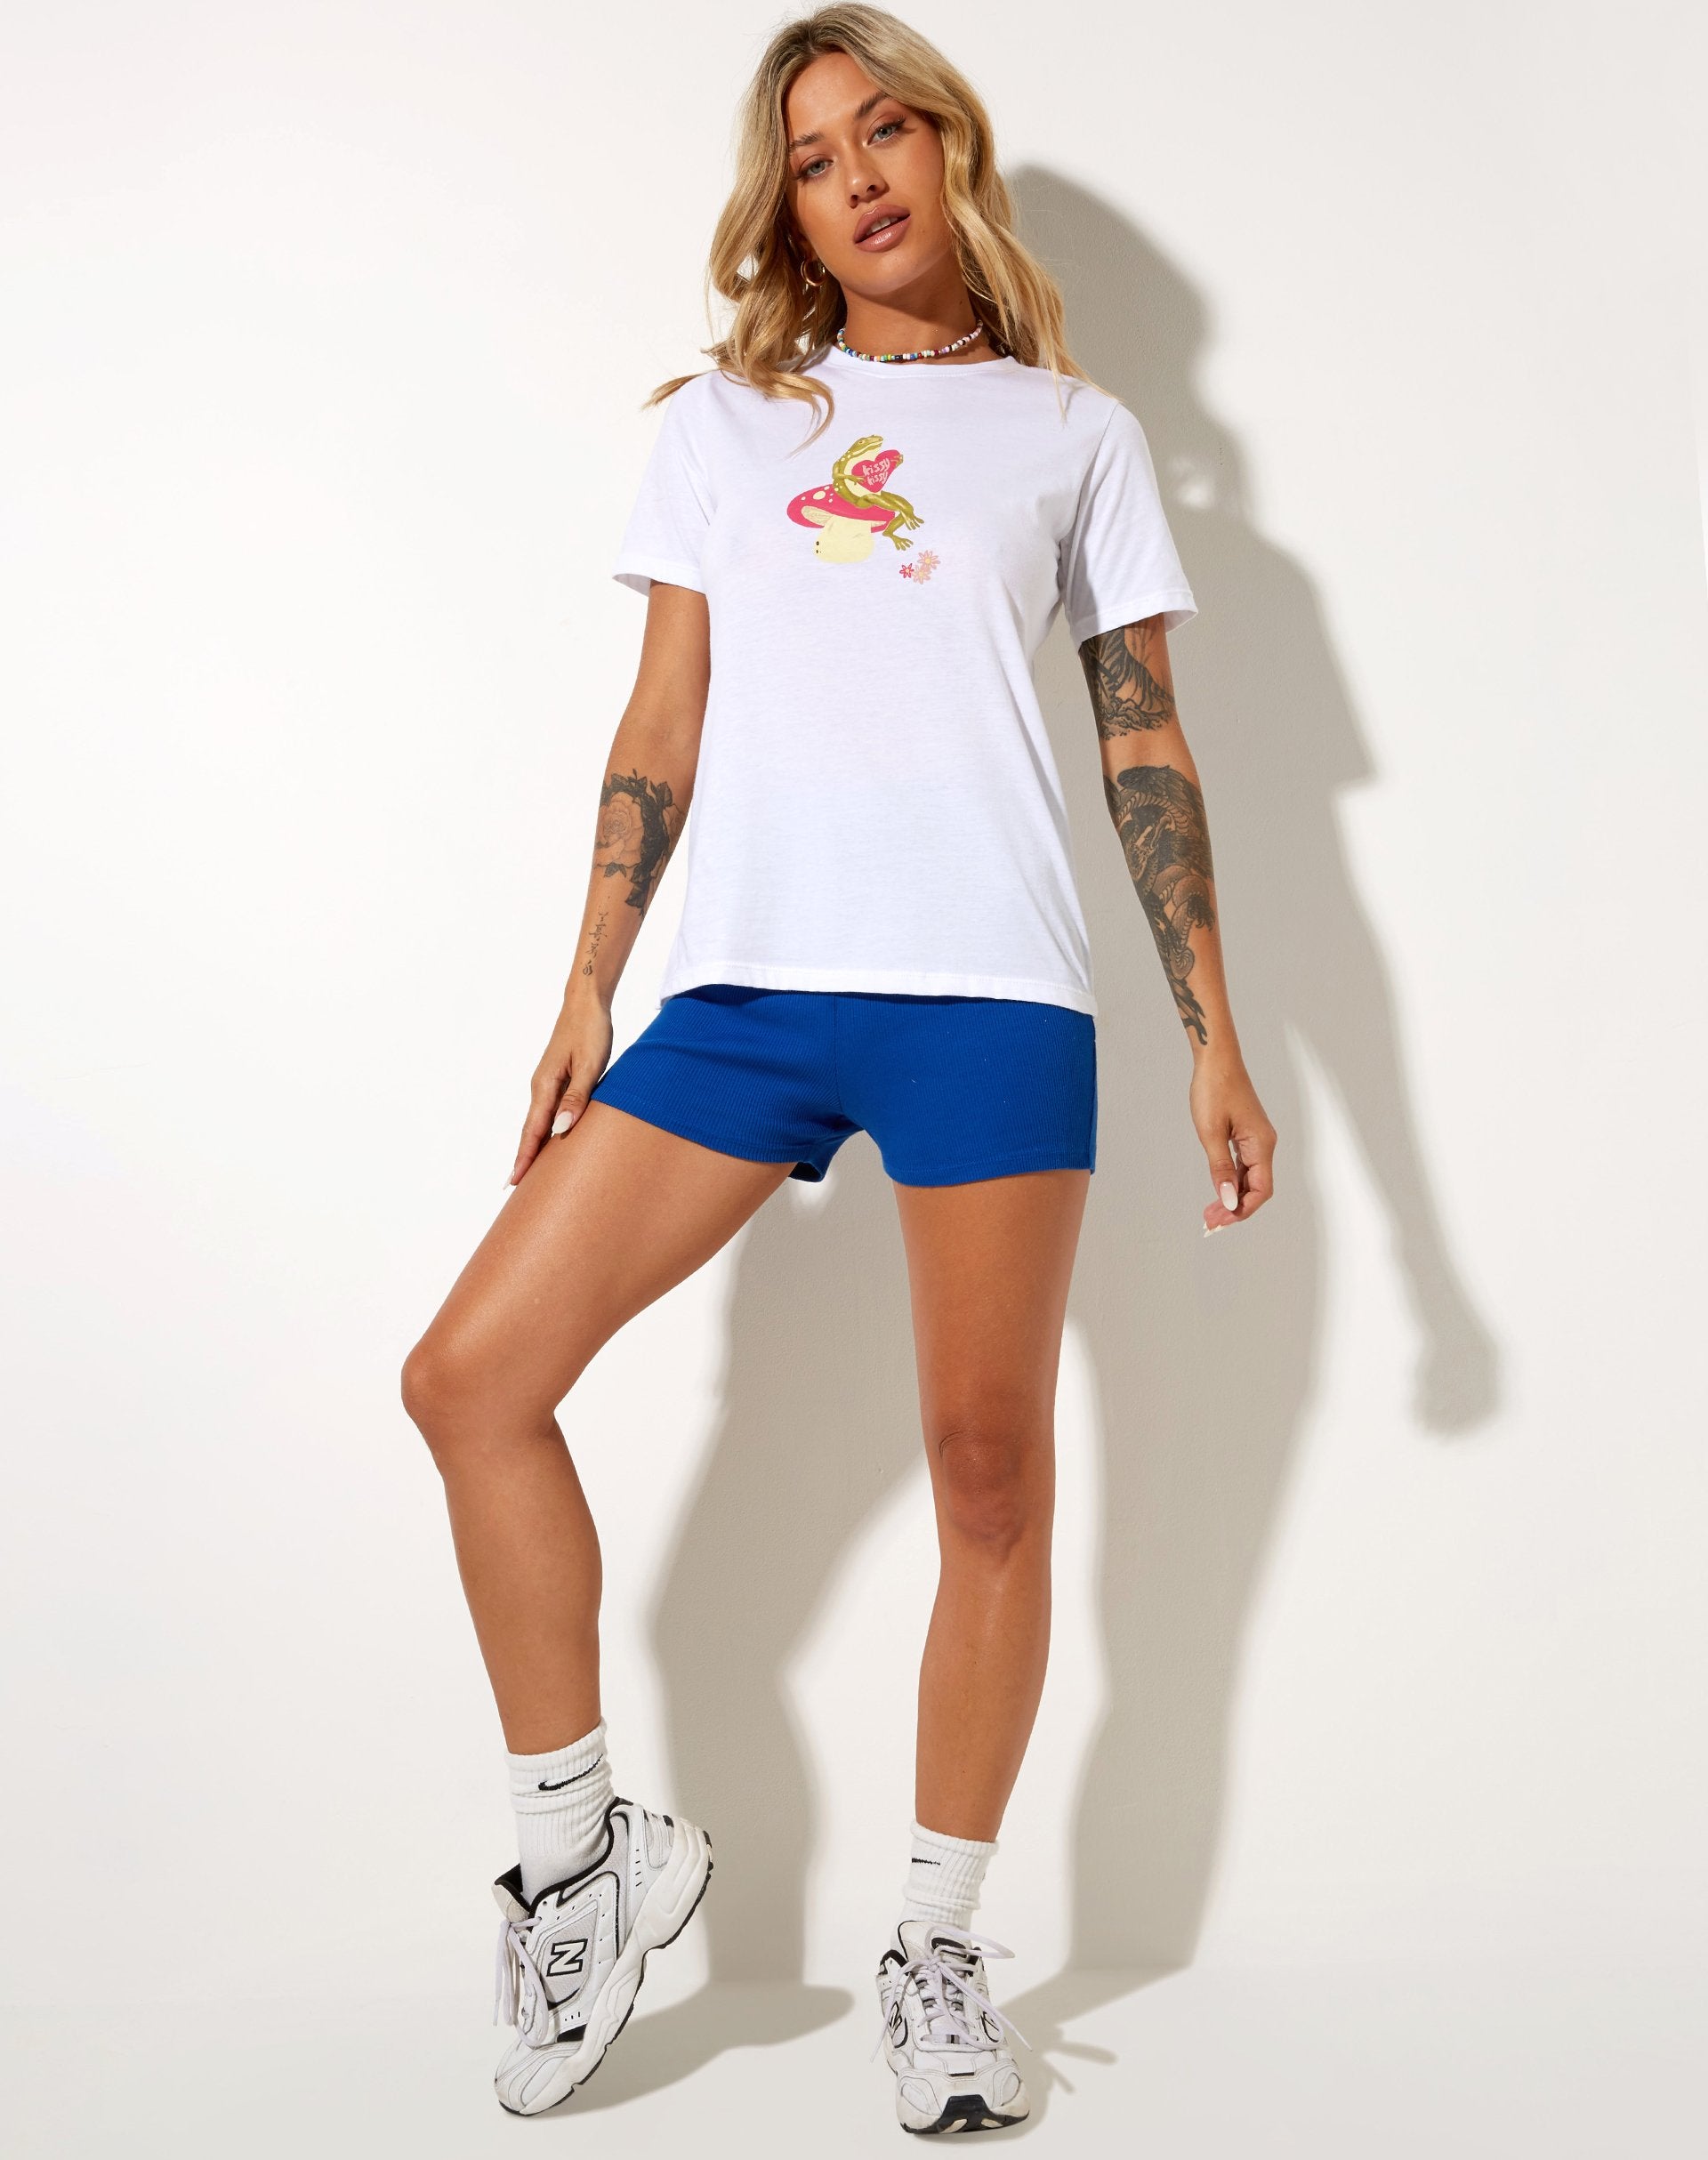 Image of Slim Fit Tee in White Kissing Frog